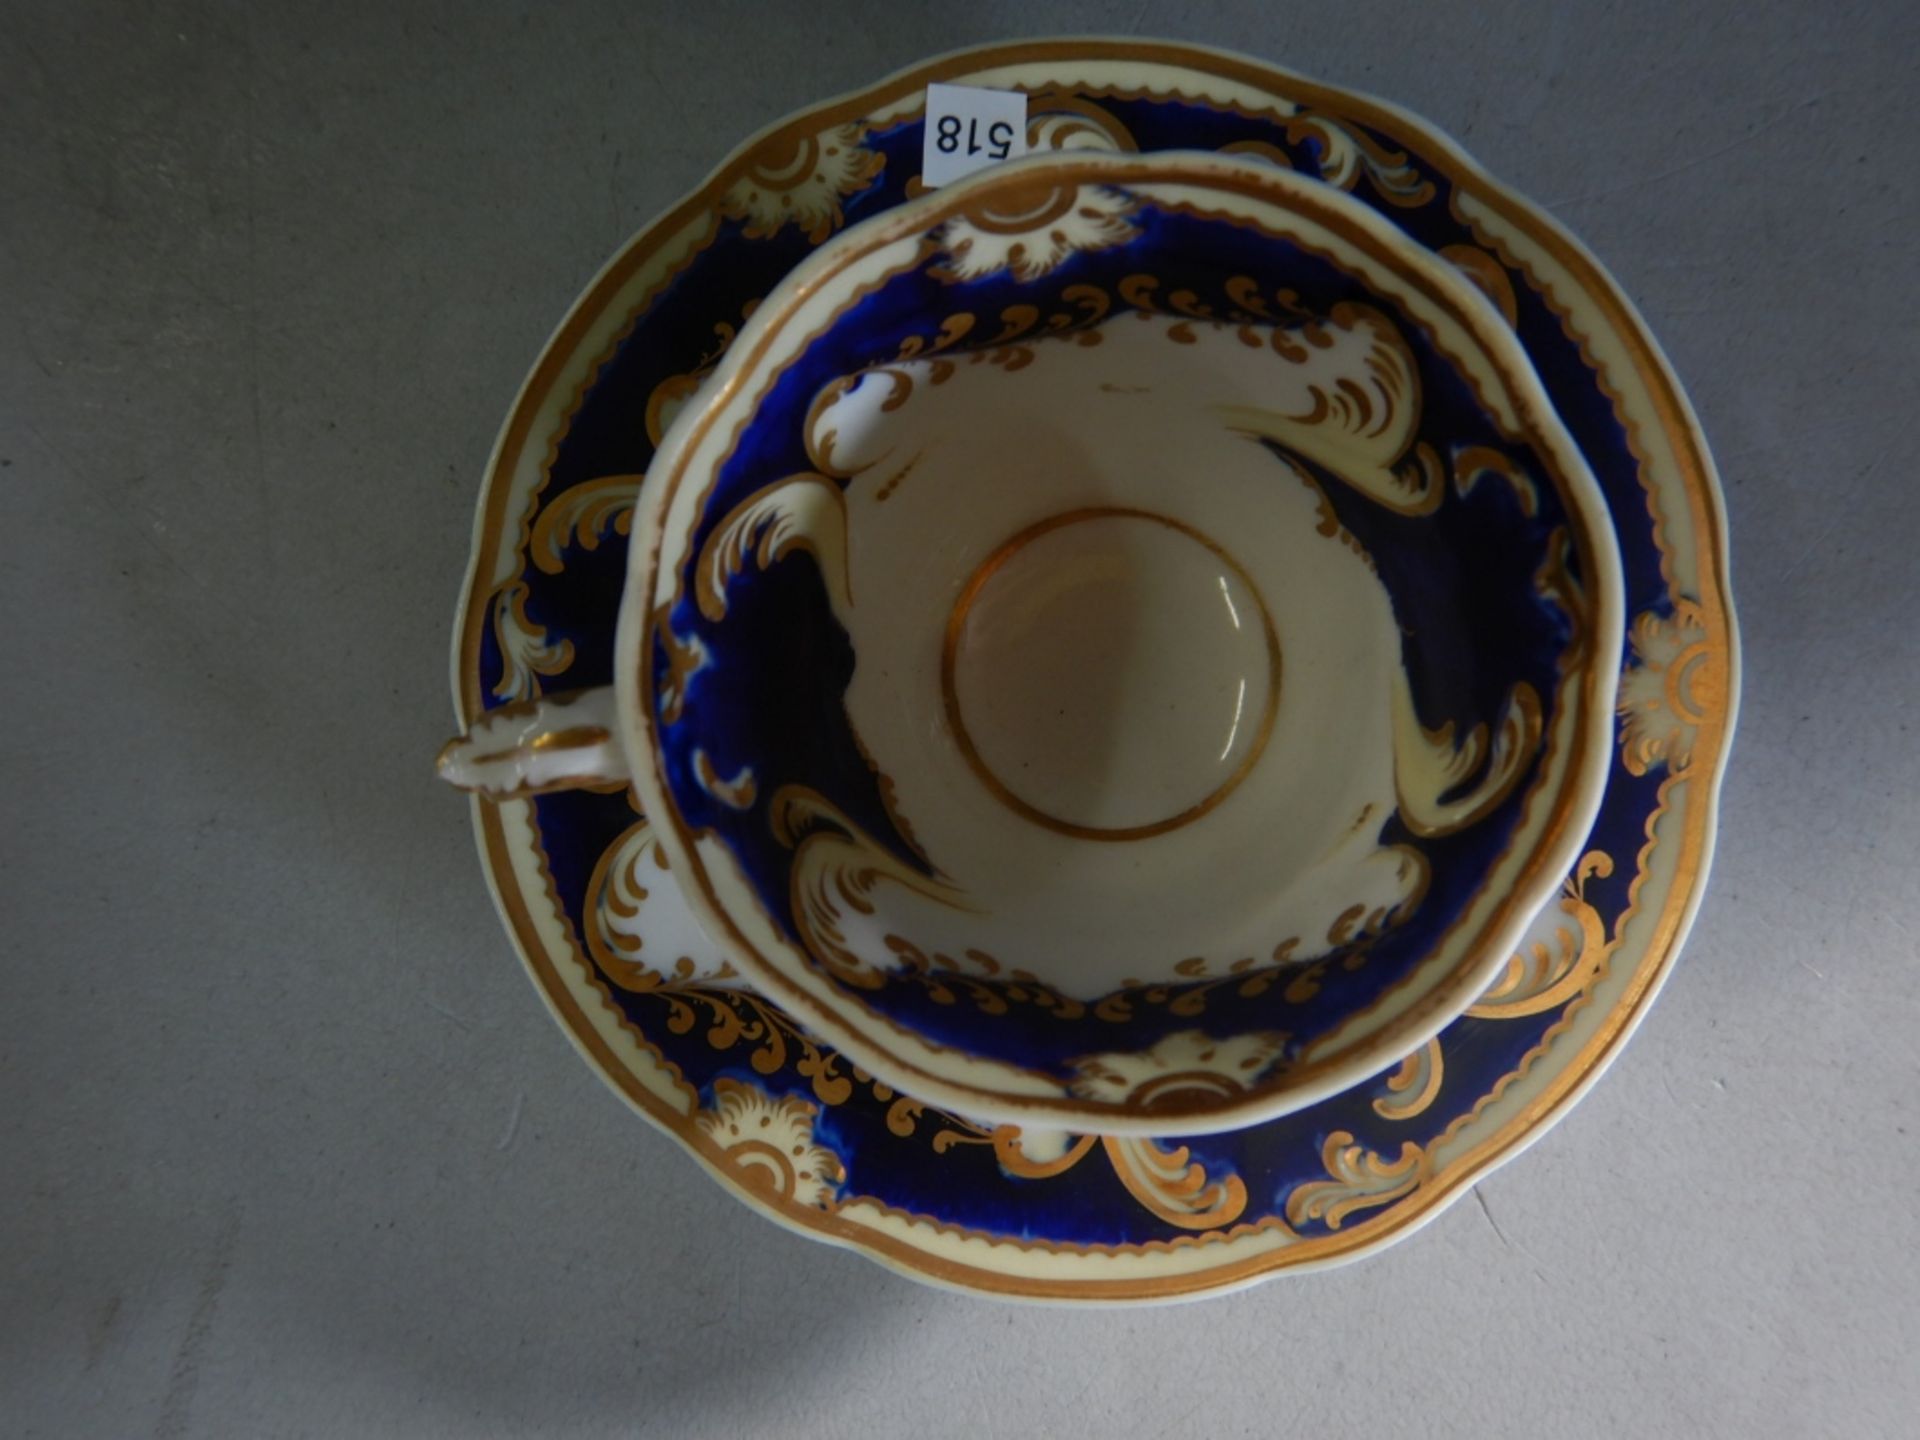 ANTIQUE TEACUP & SAUCER - FINE CHINA - VERY OLD #166/10 - Image 3 of 5